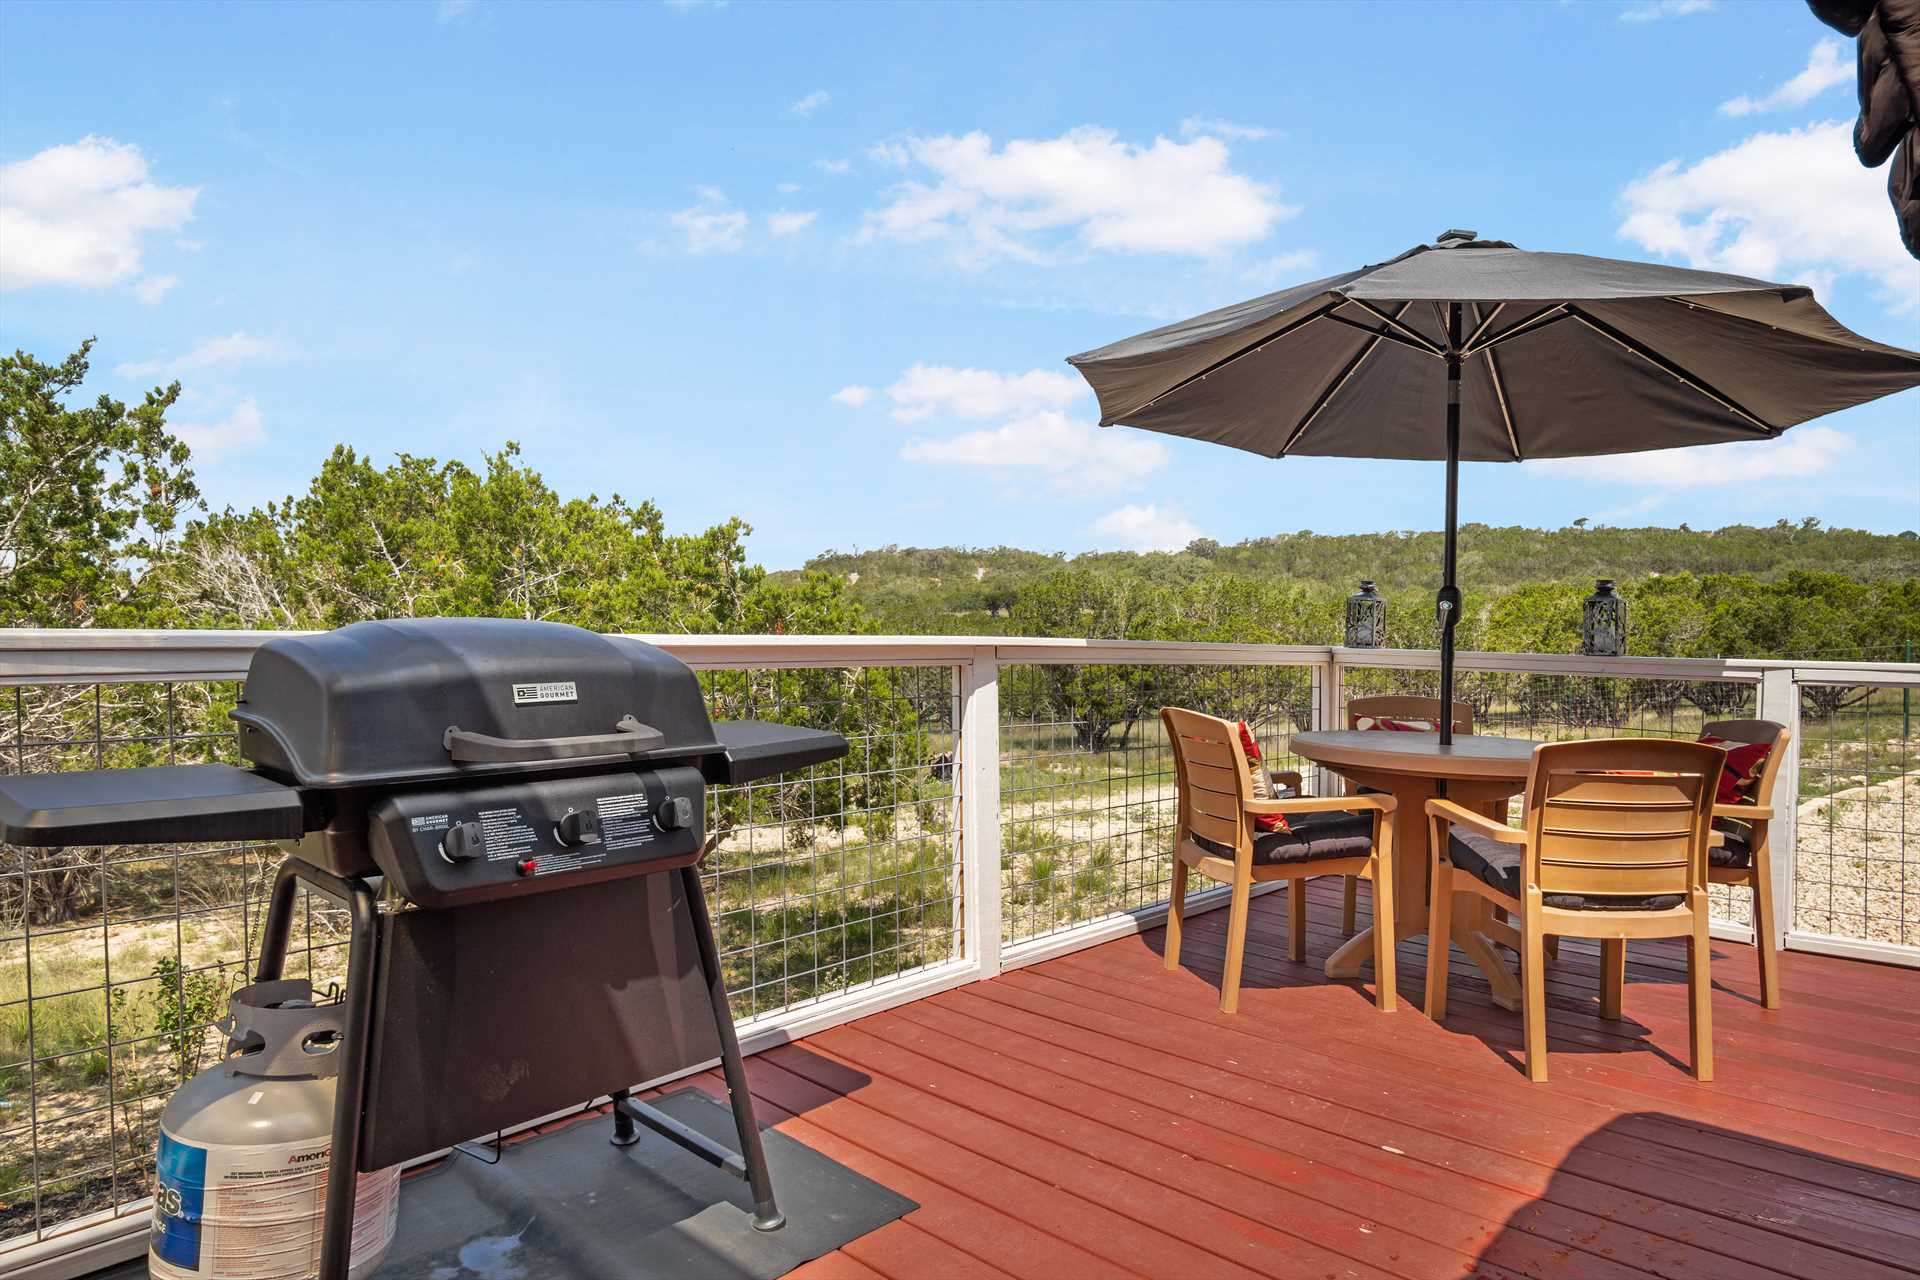                                                 Good company, good food, and amazing views all come together here for a perfect Hill Country holiday!